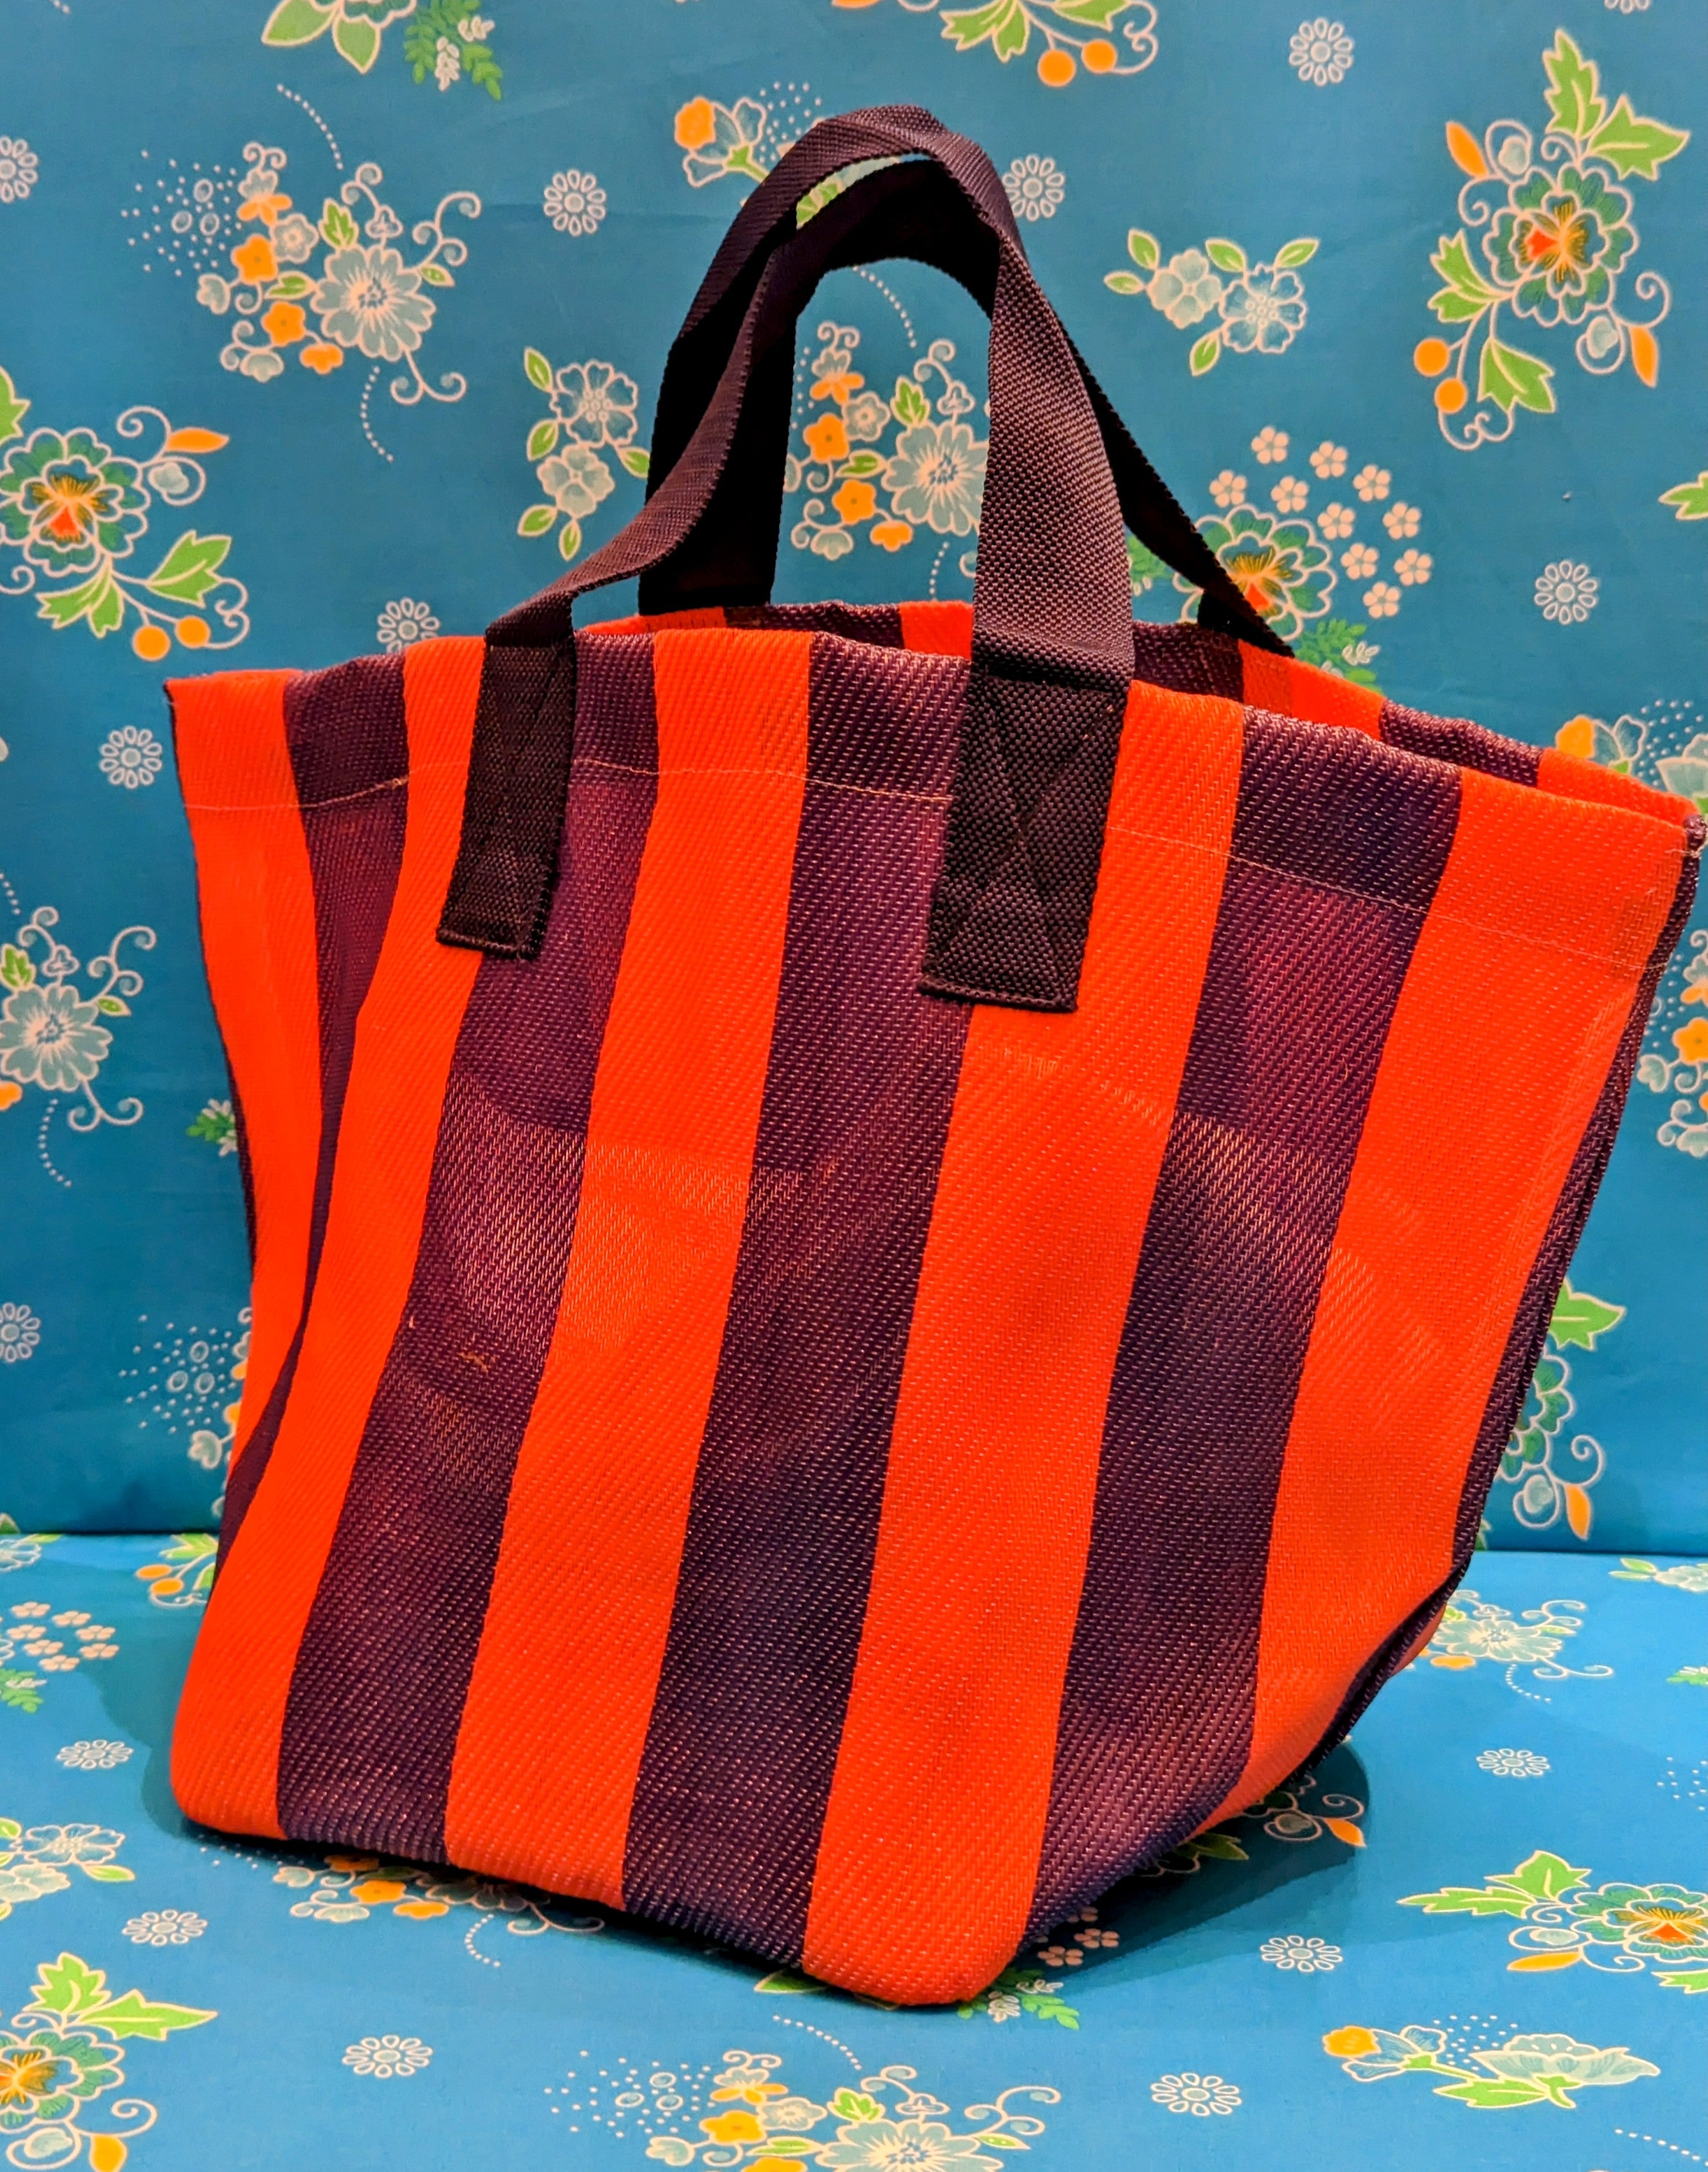 Bold striped bags